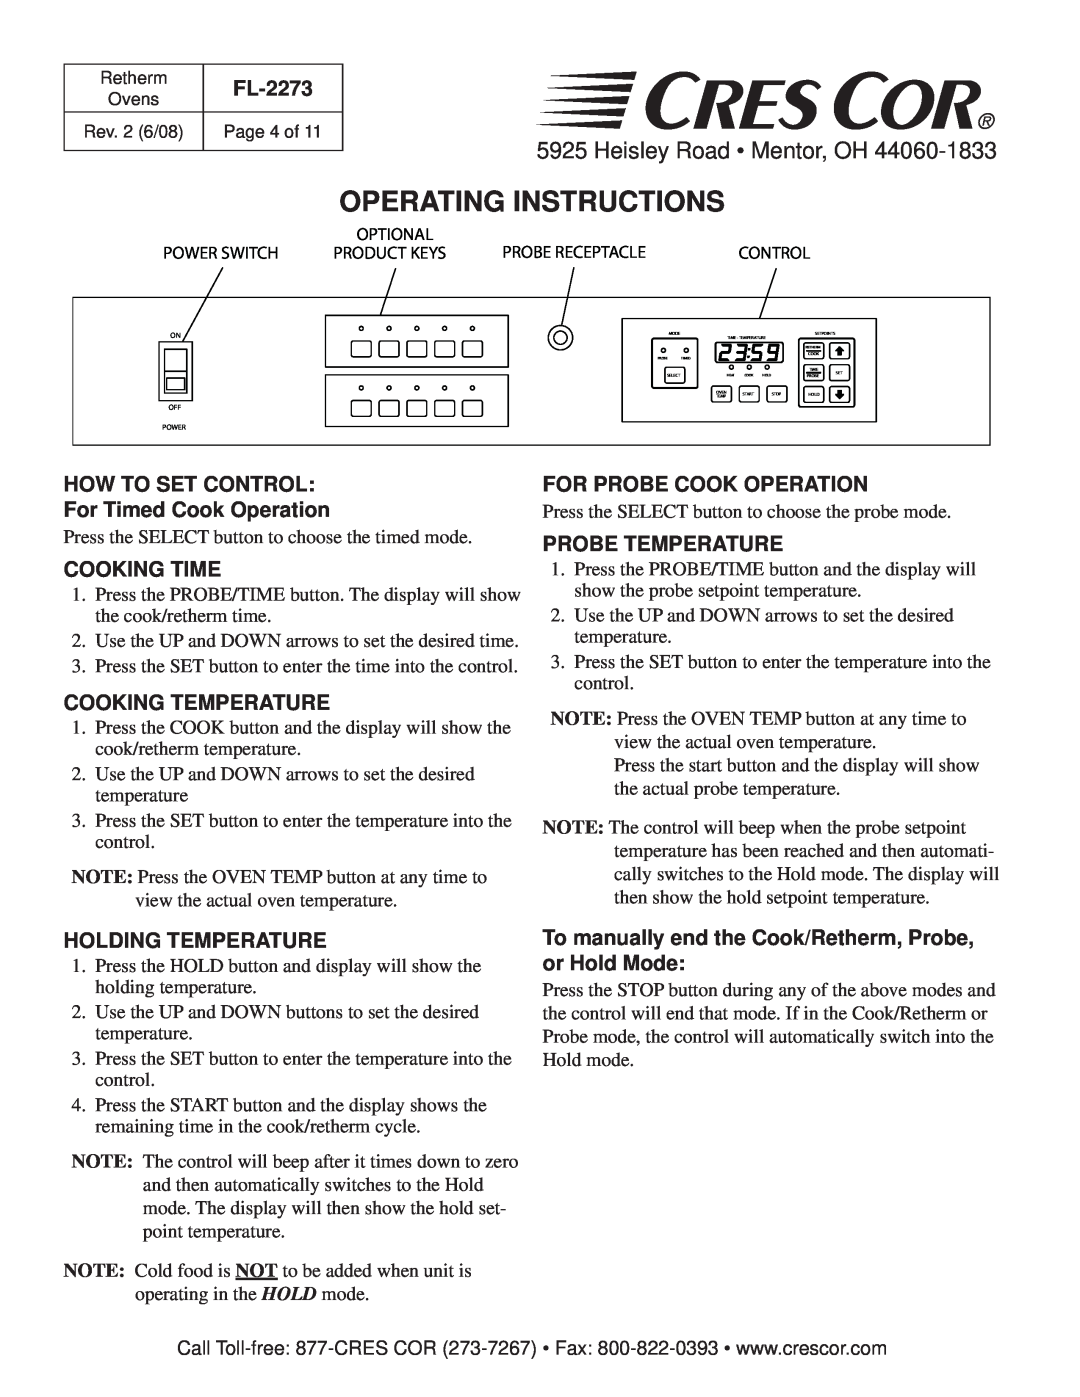 Cres Cor RR-1332 Operating Instructions, Heisley Road Mentor, OH, FL-2273, HOW TO SET CONTROL For Timed Cook Operation 